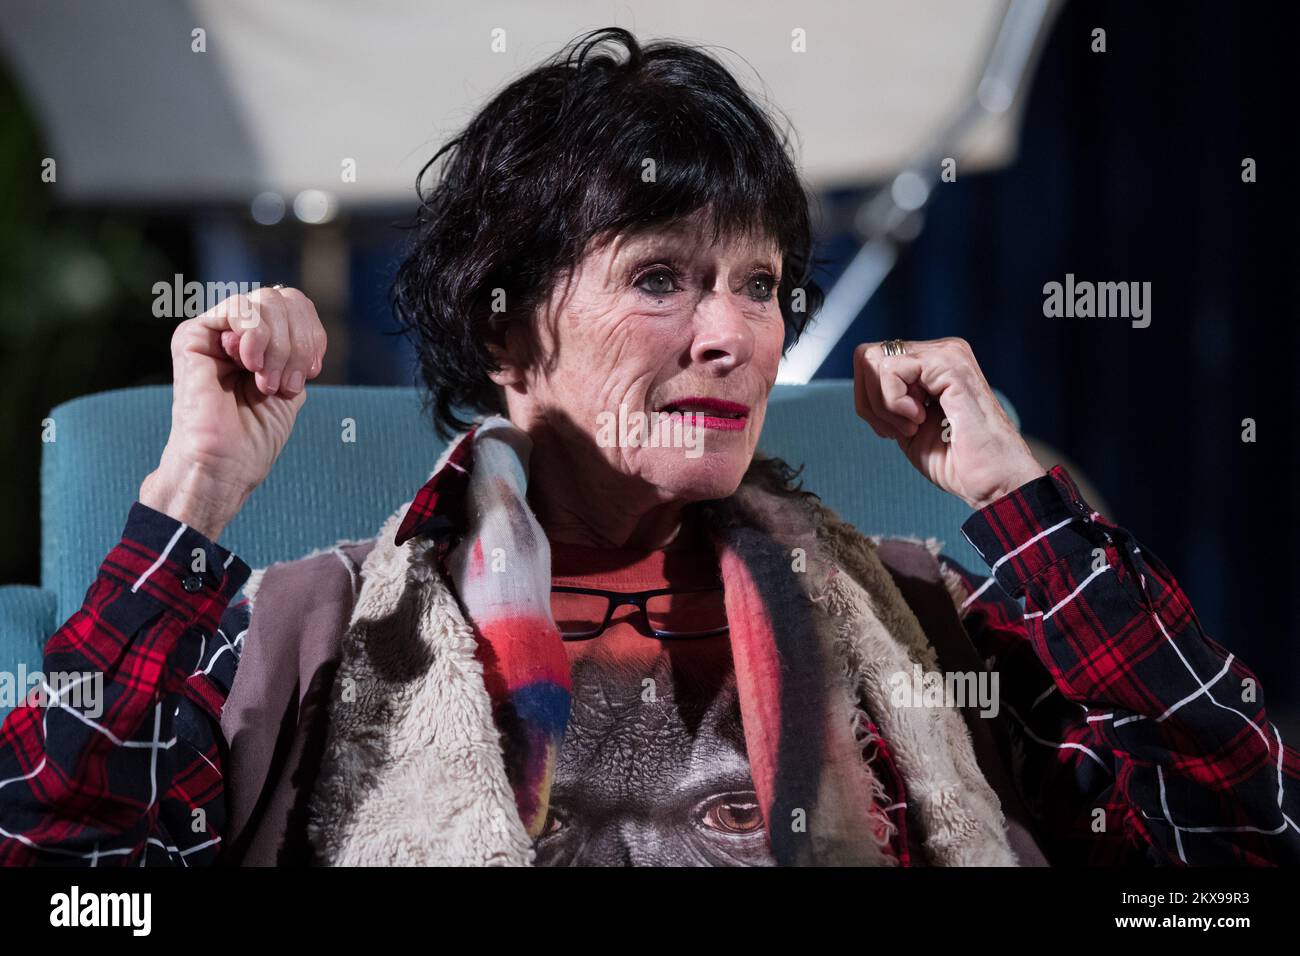 17.11.2018., Zagreb, Croatia - Geraldine Chaplin, the iconic actress of Spanish, American and French films and daughter of the legendary Charlie Chaplin attend a press conference at the 16th Zagreb Film Festival, where she presented the romantic comedy Anchor and Hope. Photo: Davor Puklavec/PIXSELL Stock Photo